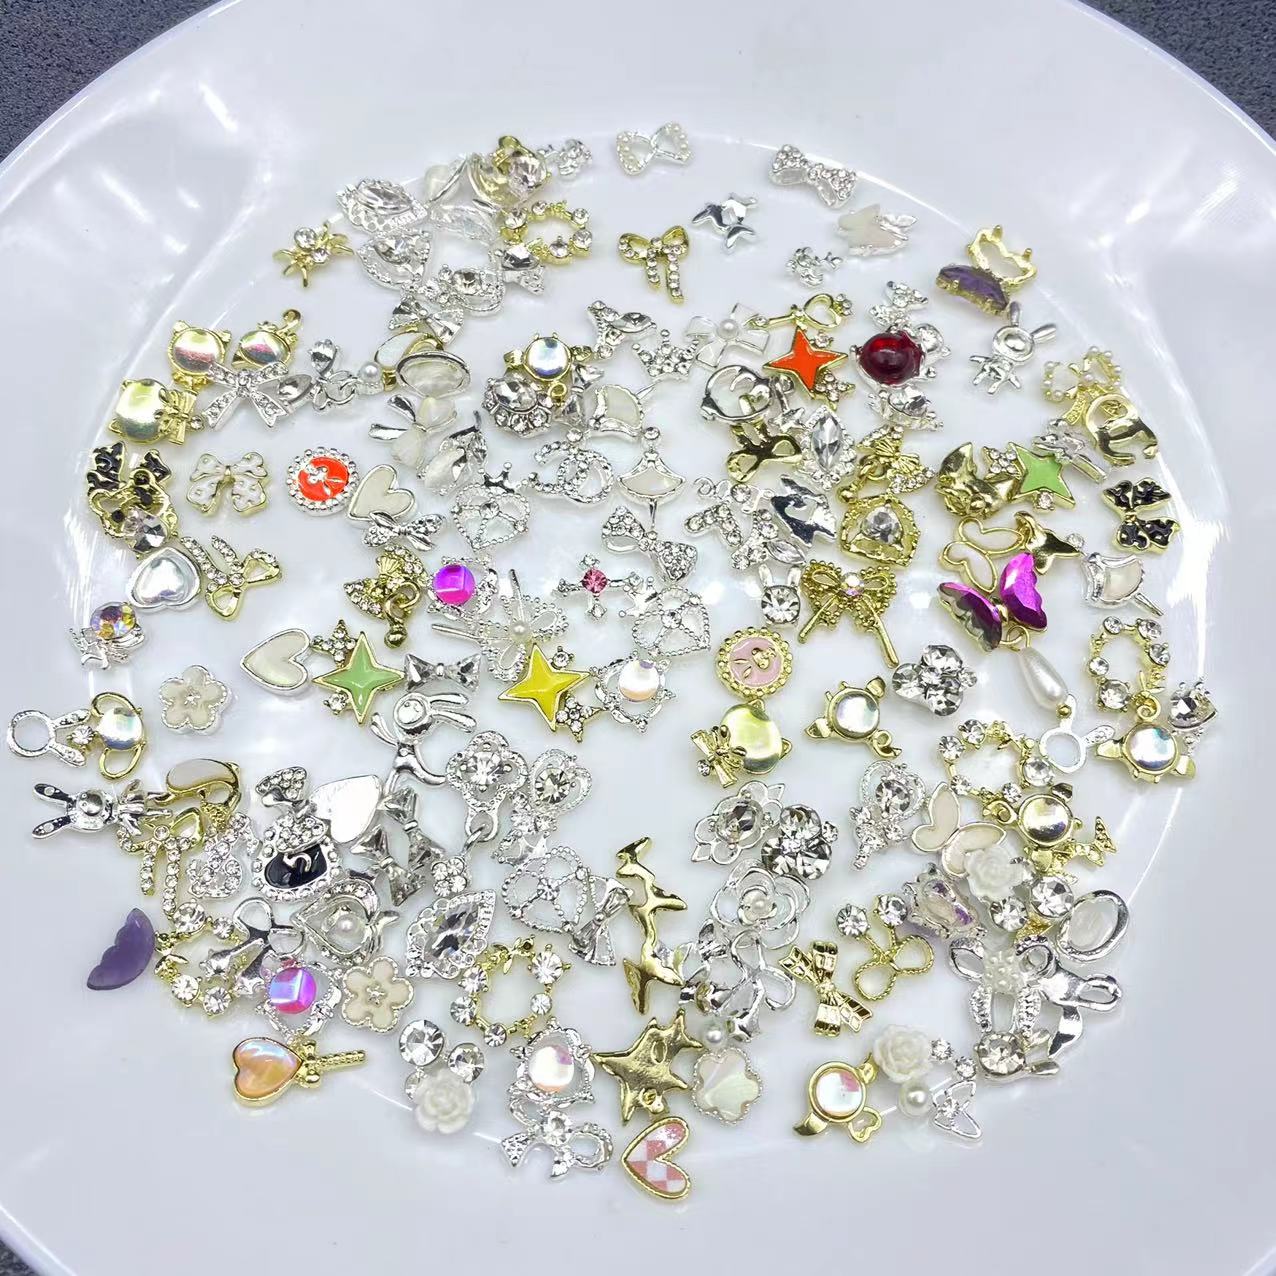 50pcs 3D Acrylic Nails Charms for Mix Styles Rhinestones for Nails